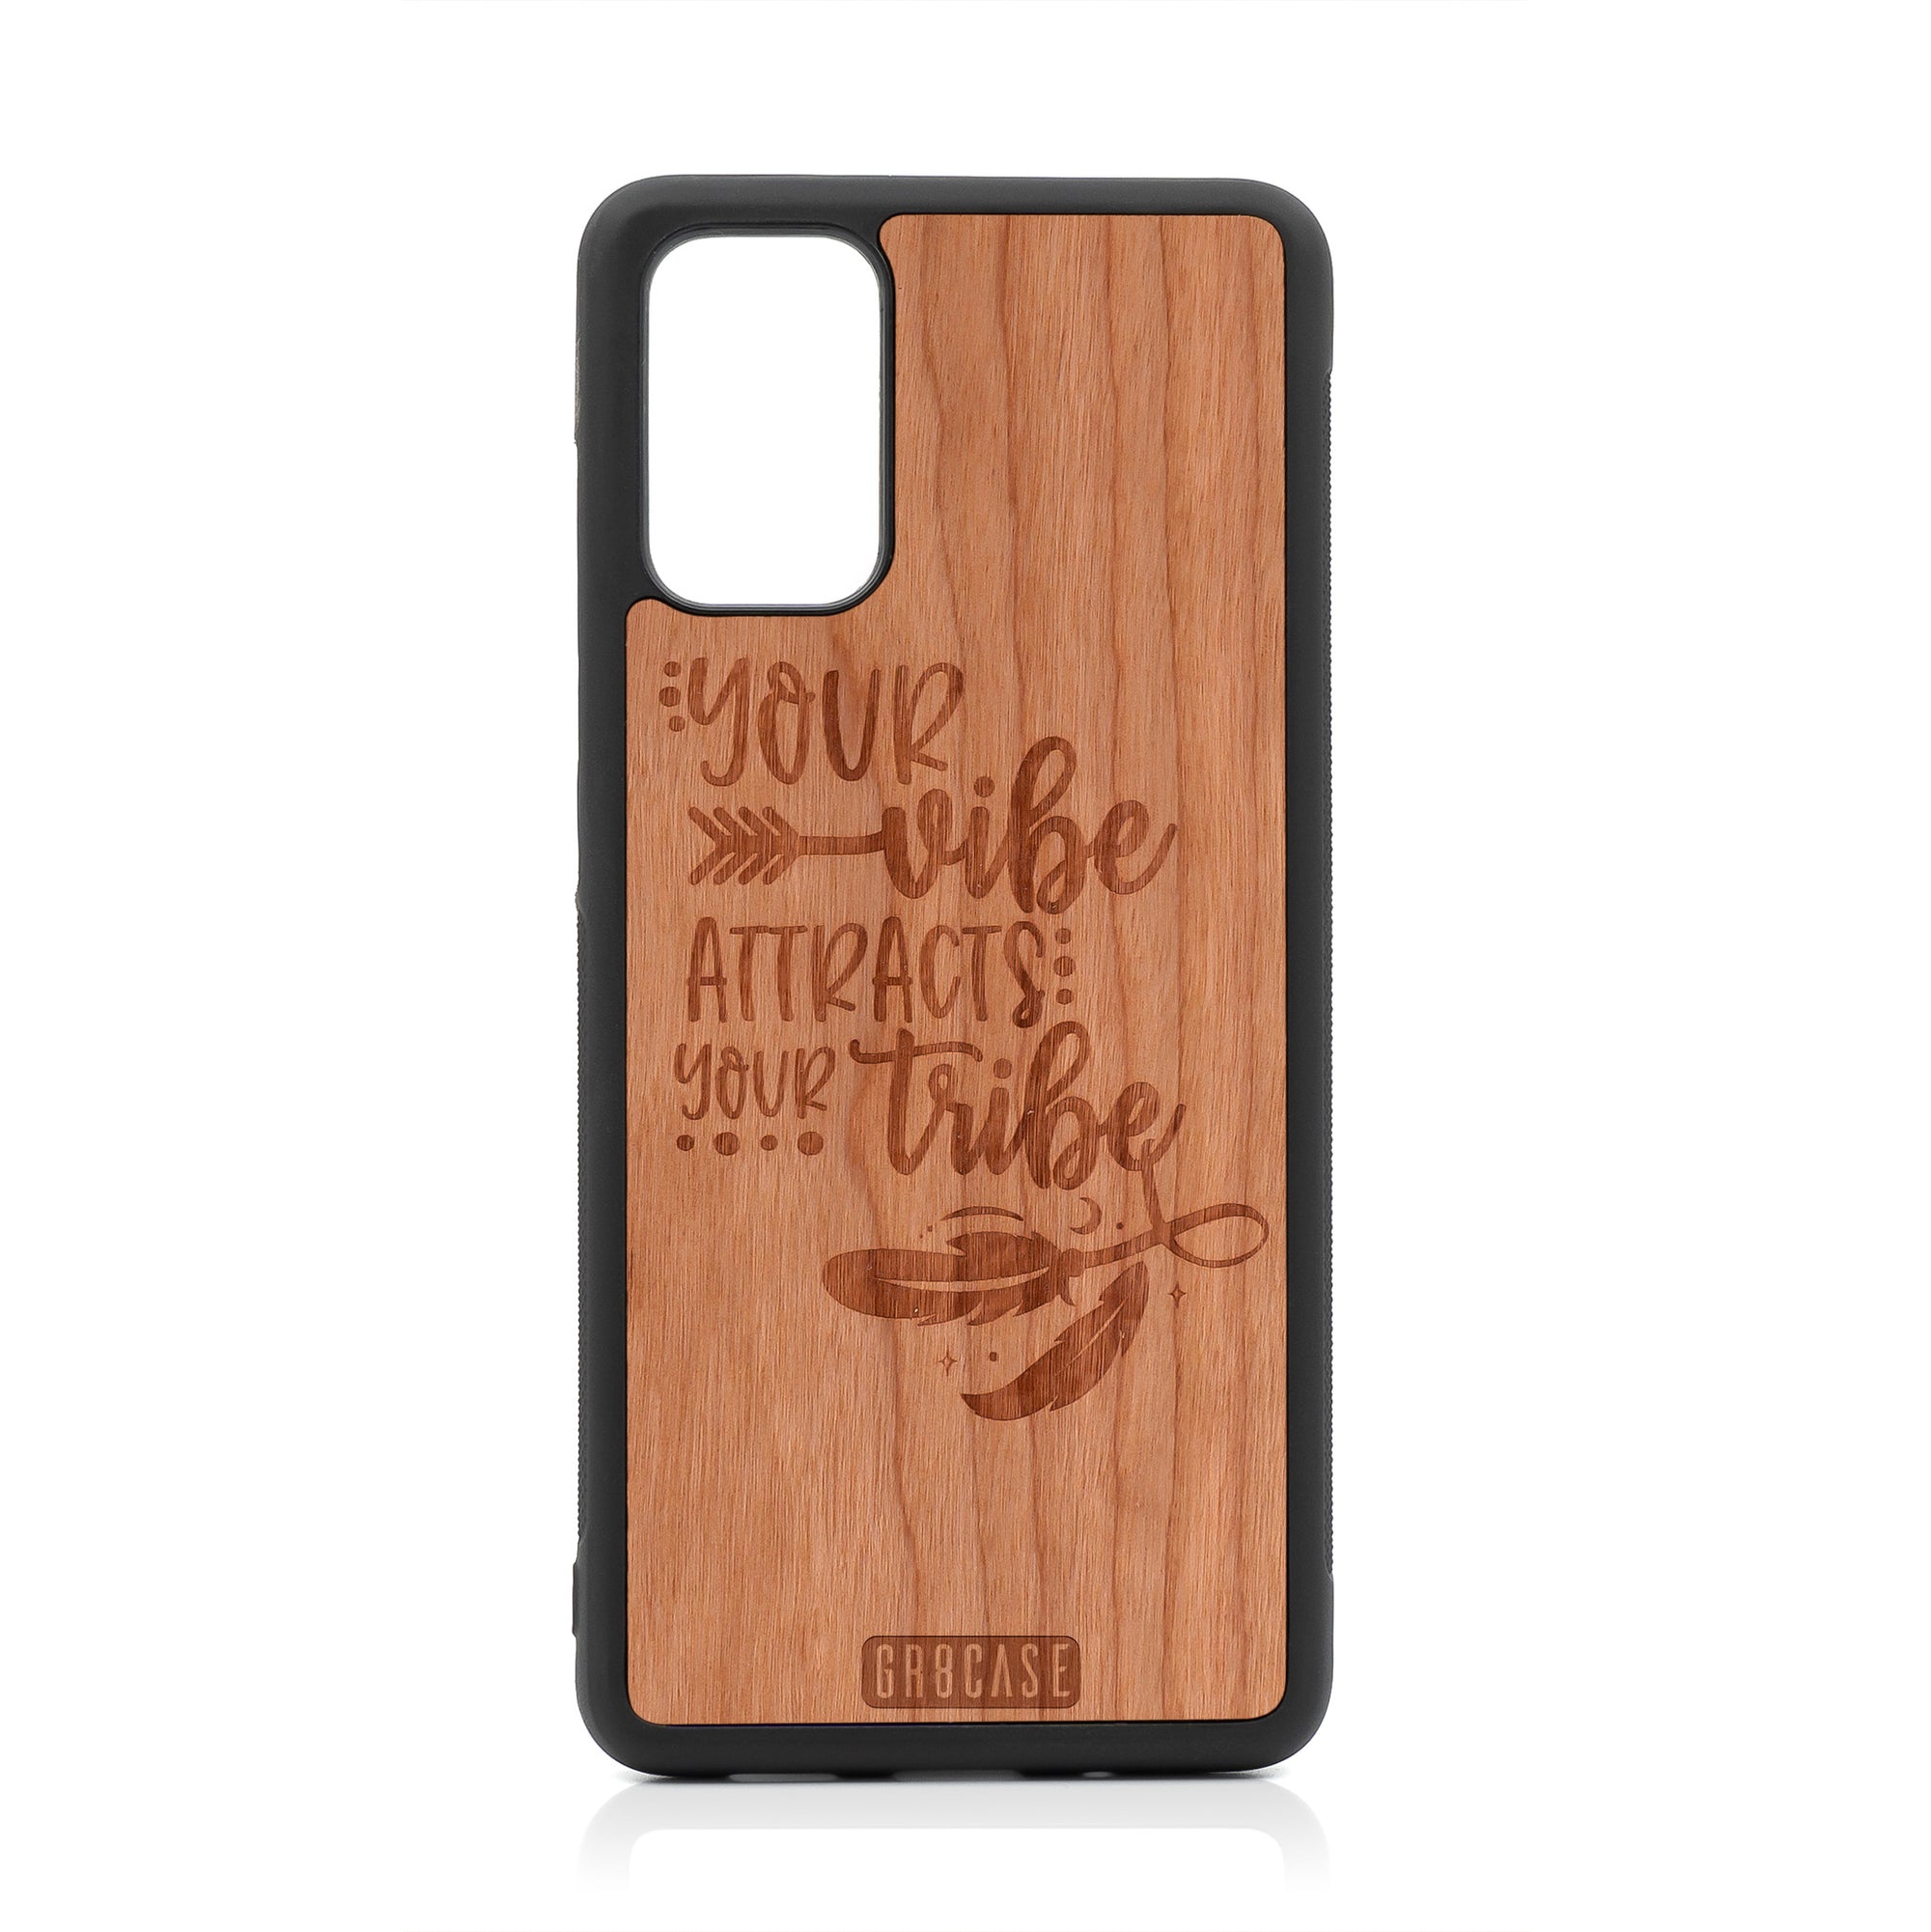 Your Vibe Attracts Your Tribe Design Wood Case For Samsung Galaxy S20 Plus